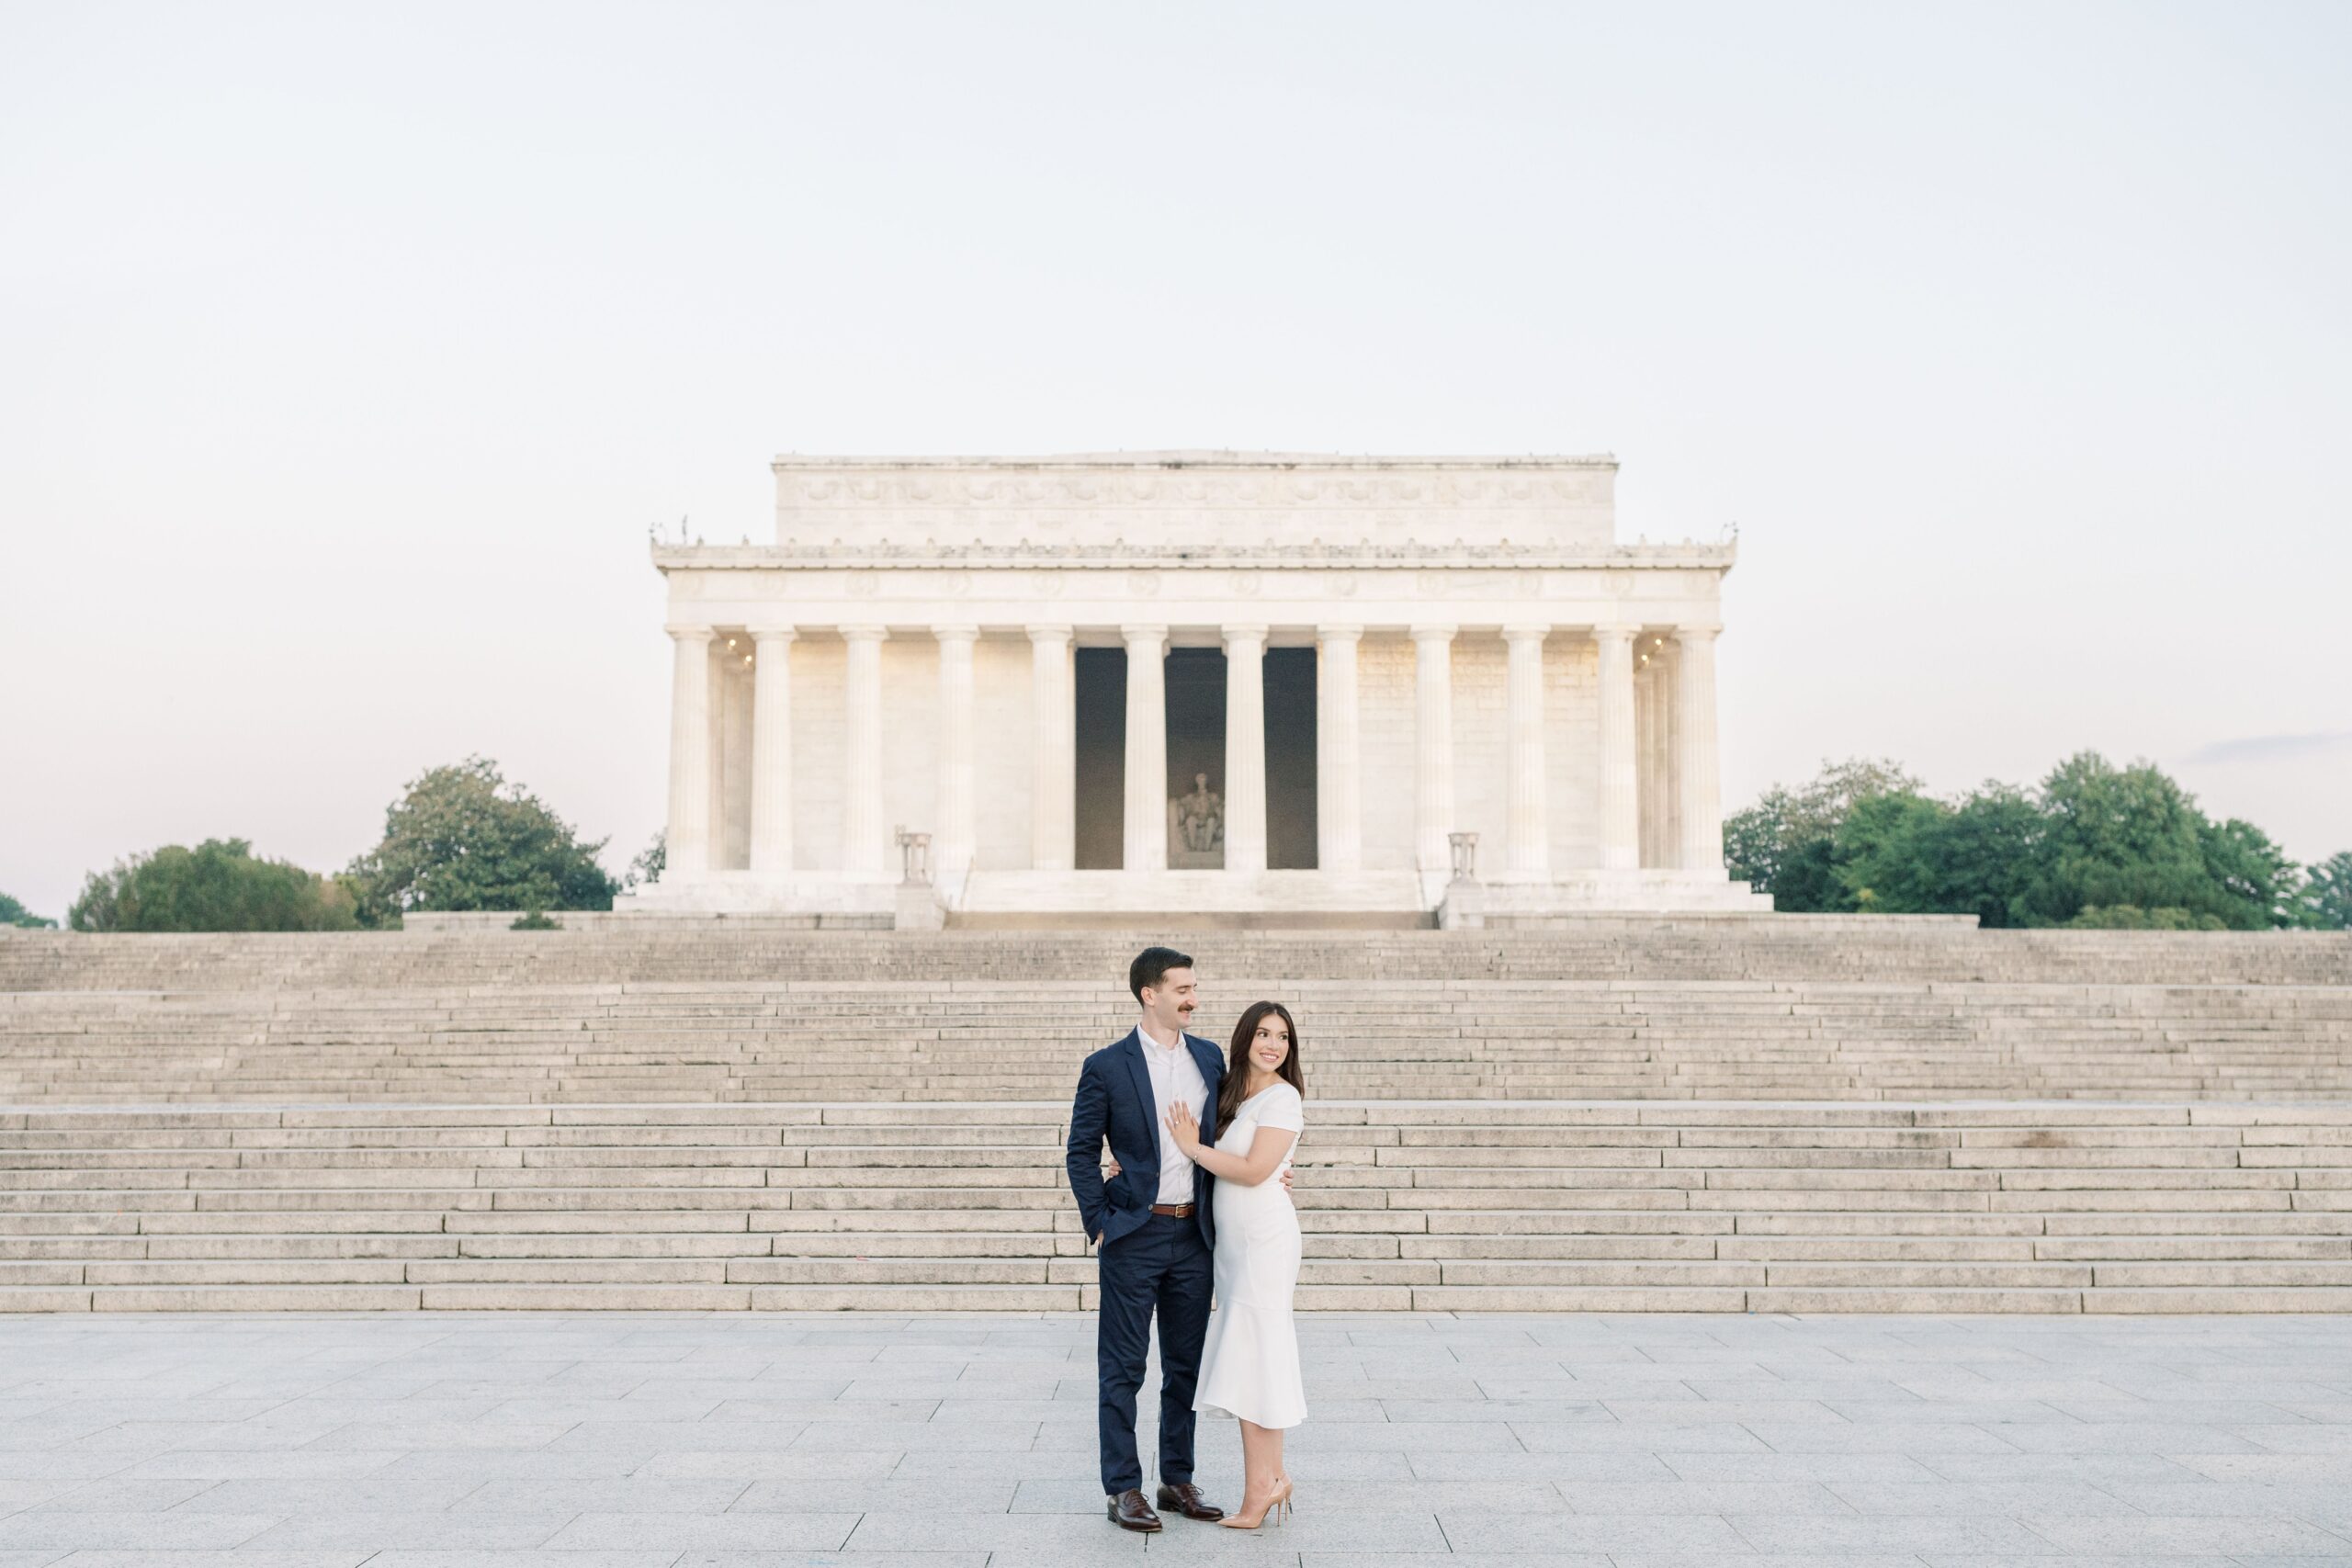 A summery engagement session at the iconic Monuments in Washington, DC including the Lincoln Memorial and Reflecting Pool.